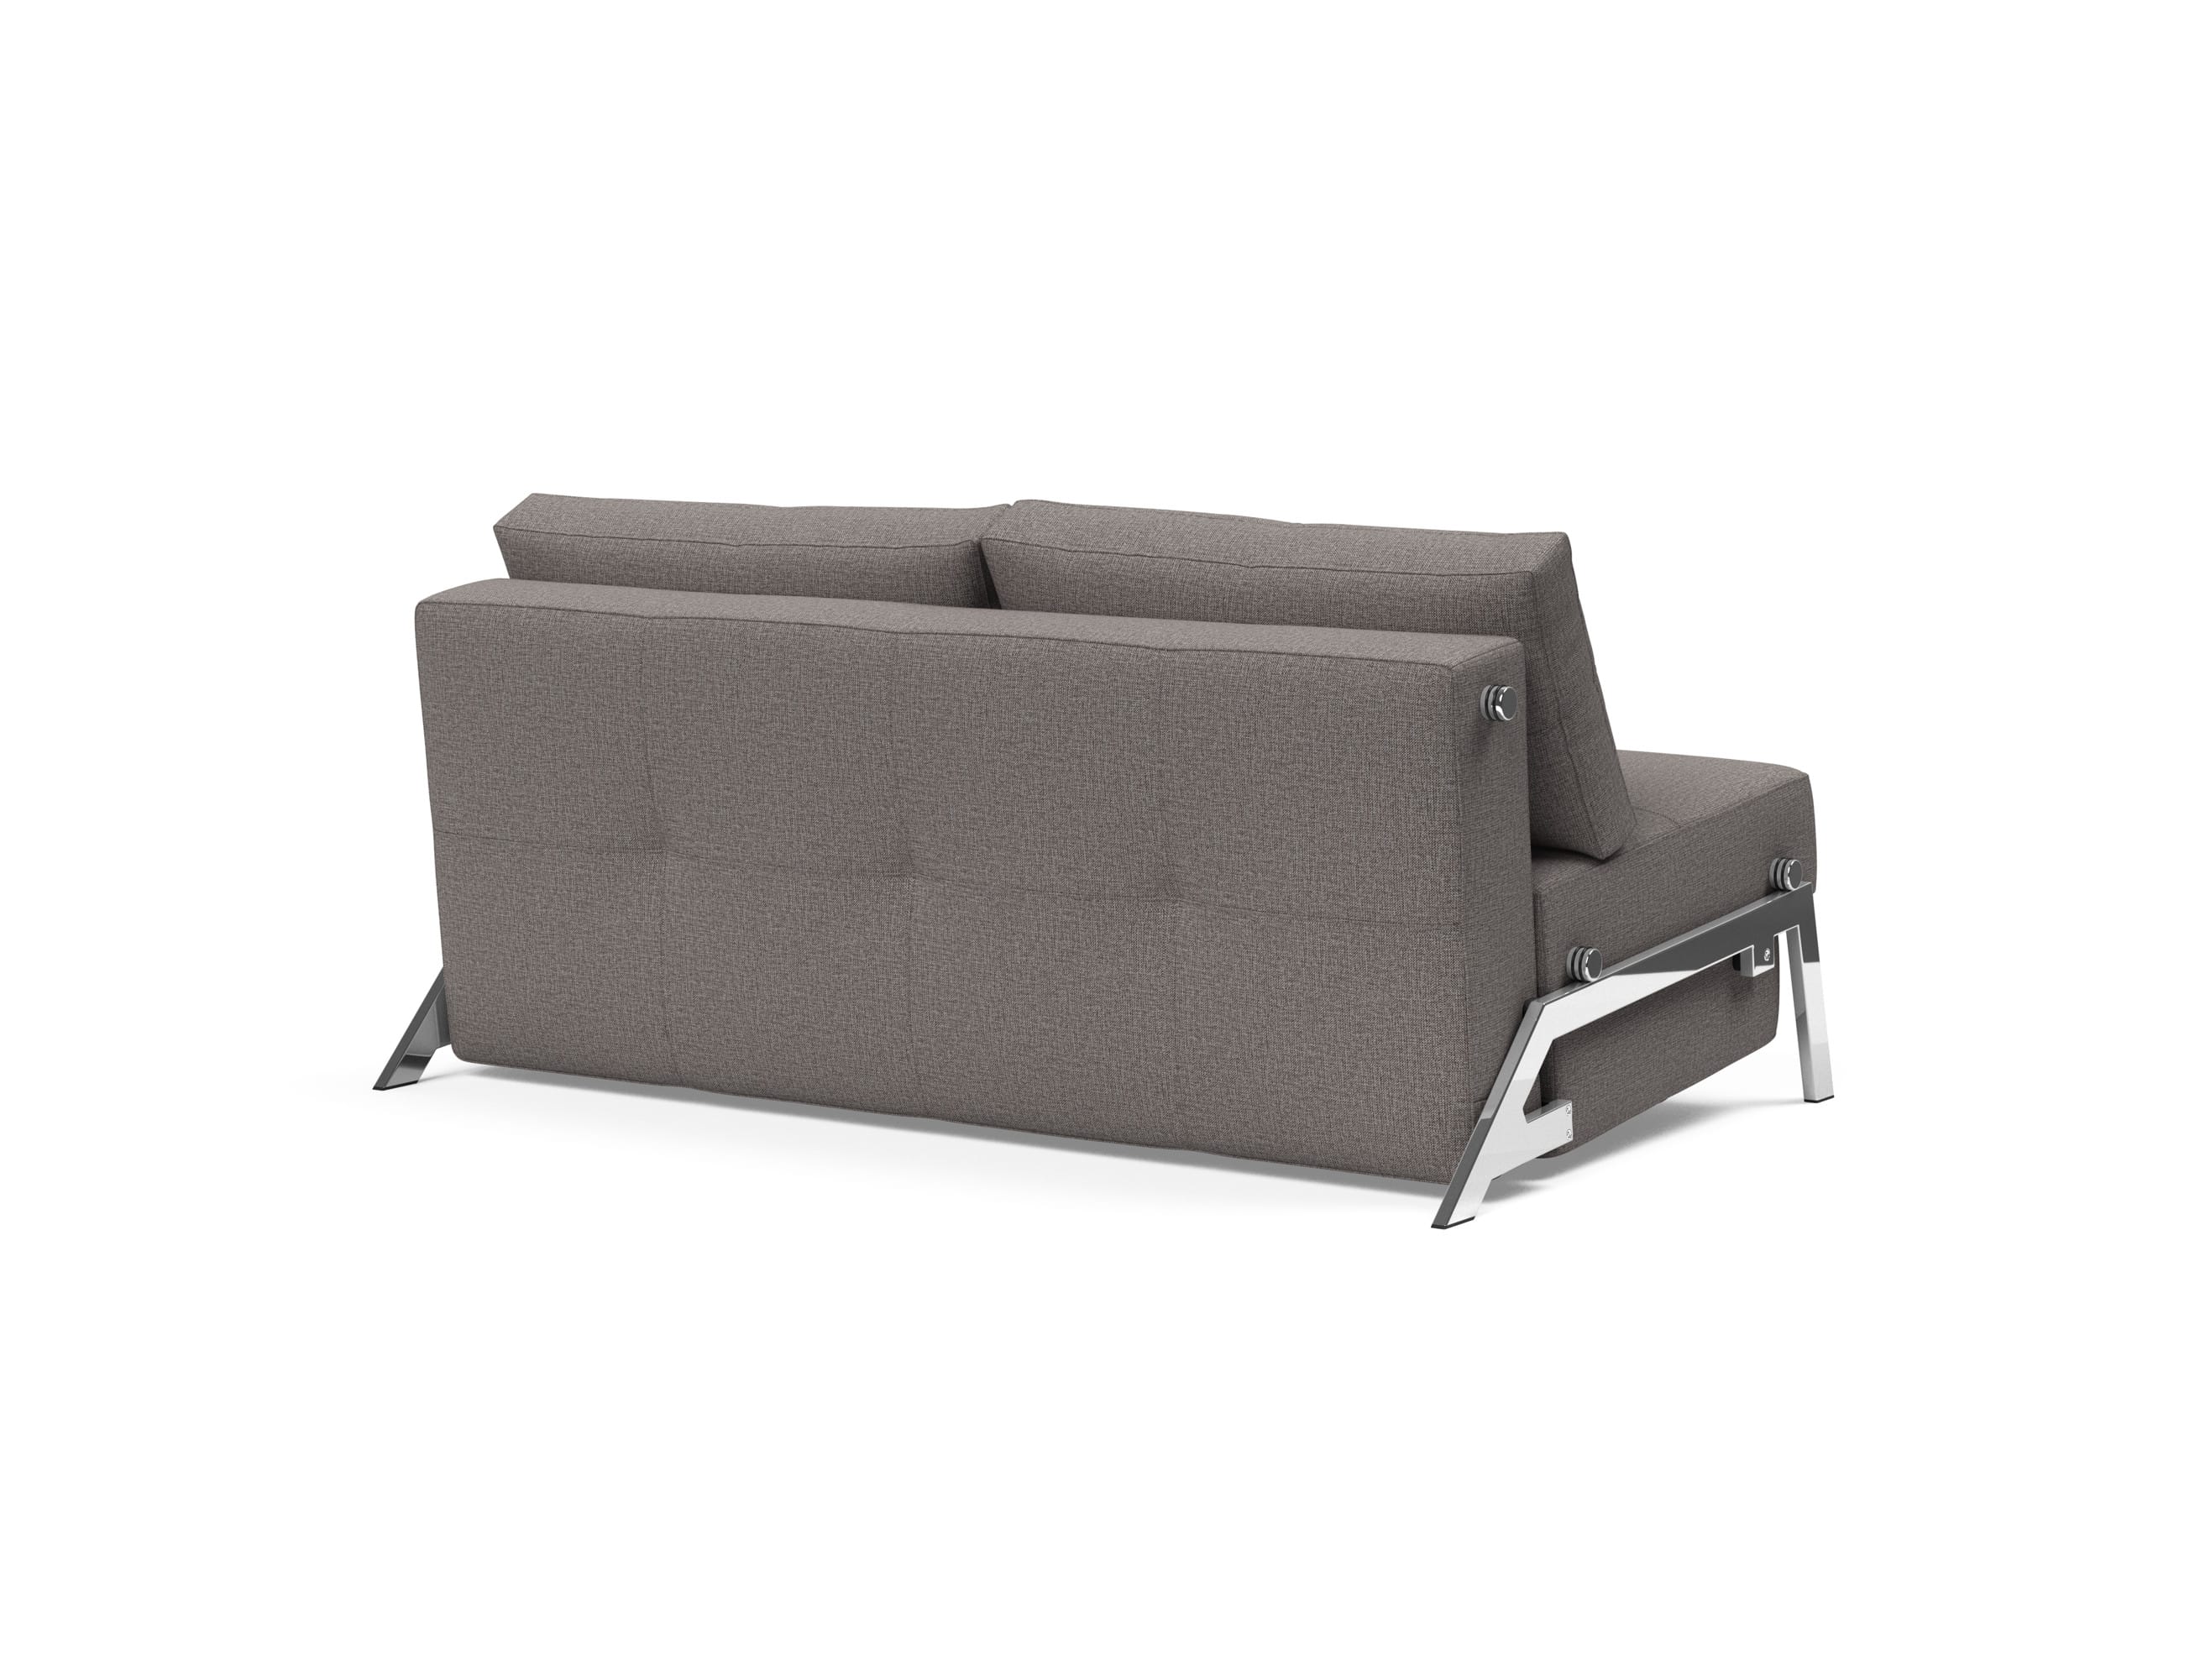 Cubed Deluxe Sofa Bed (Queen Size) Mixed Gray by Innovation